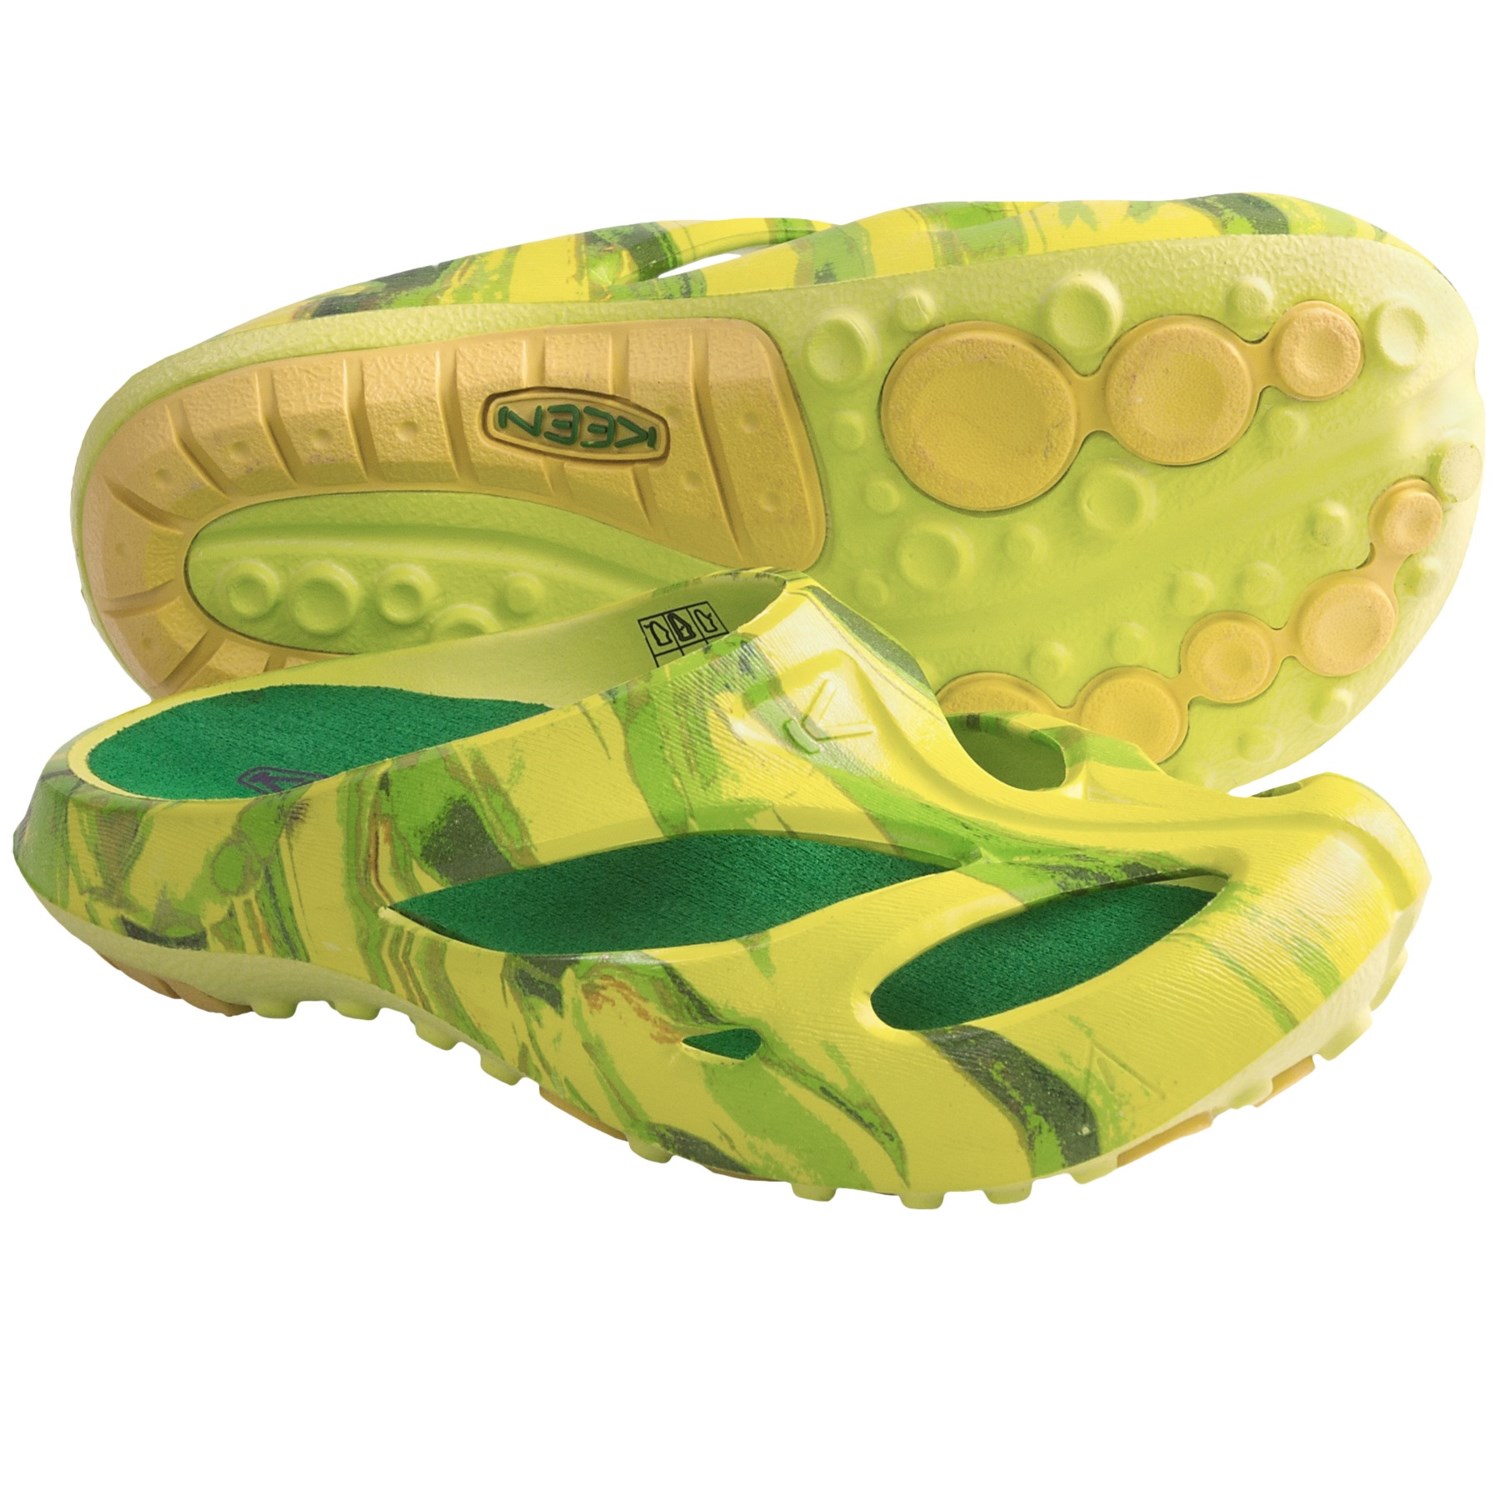 Keen Shanti Arts Sandals (For Women) 6297Y - Save 40%